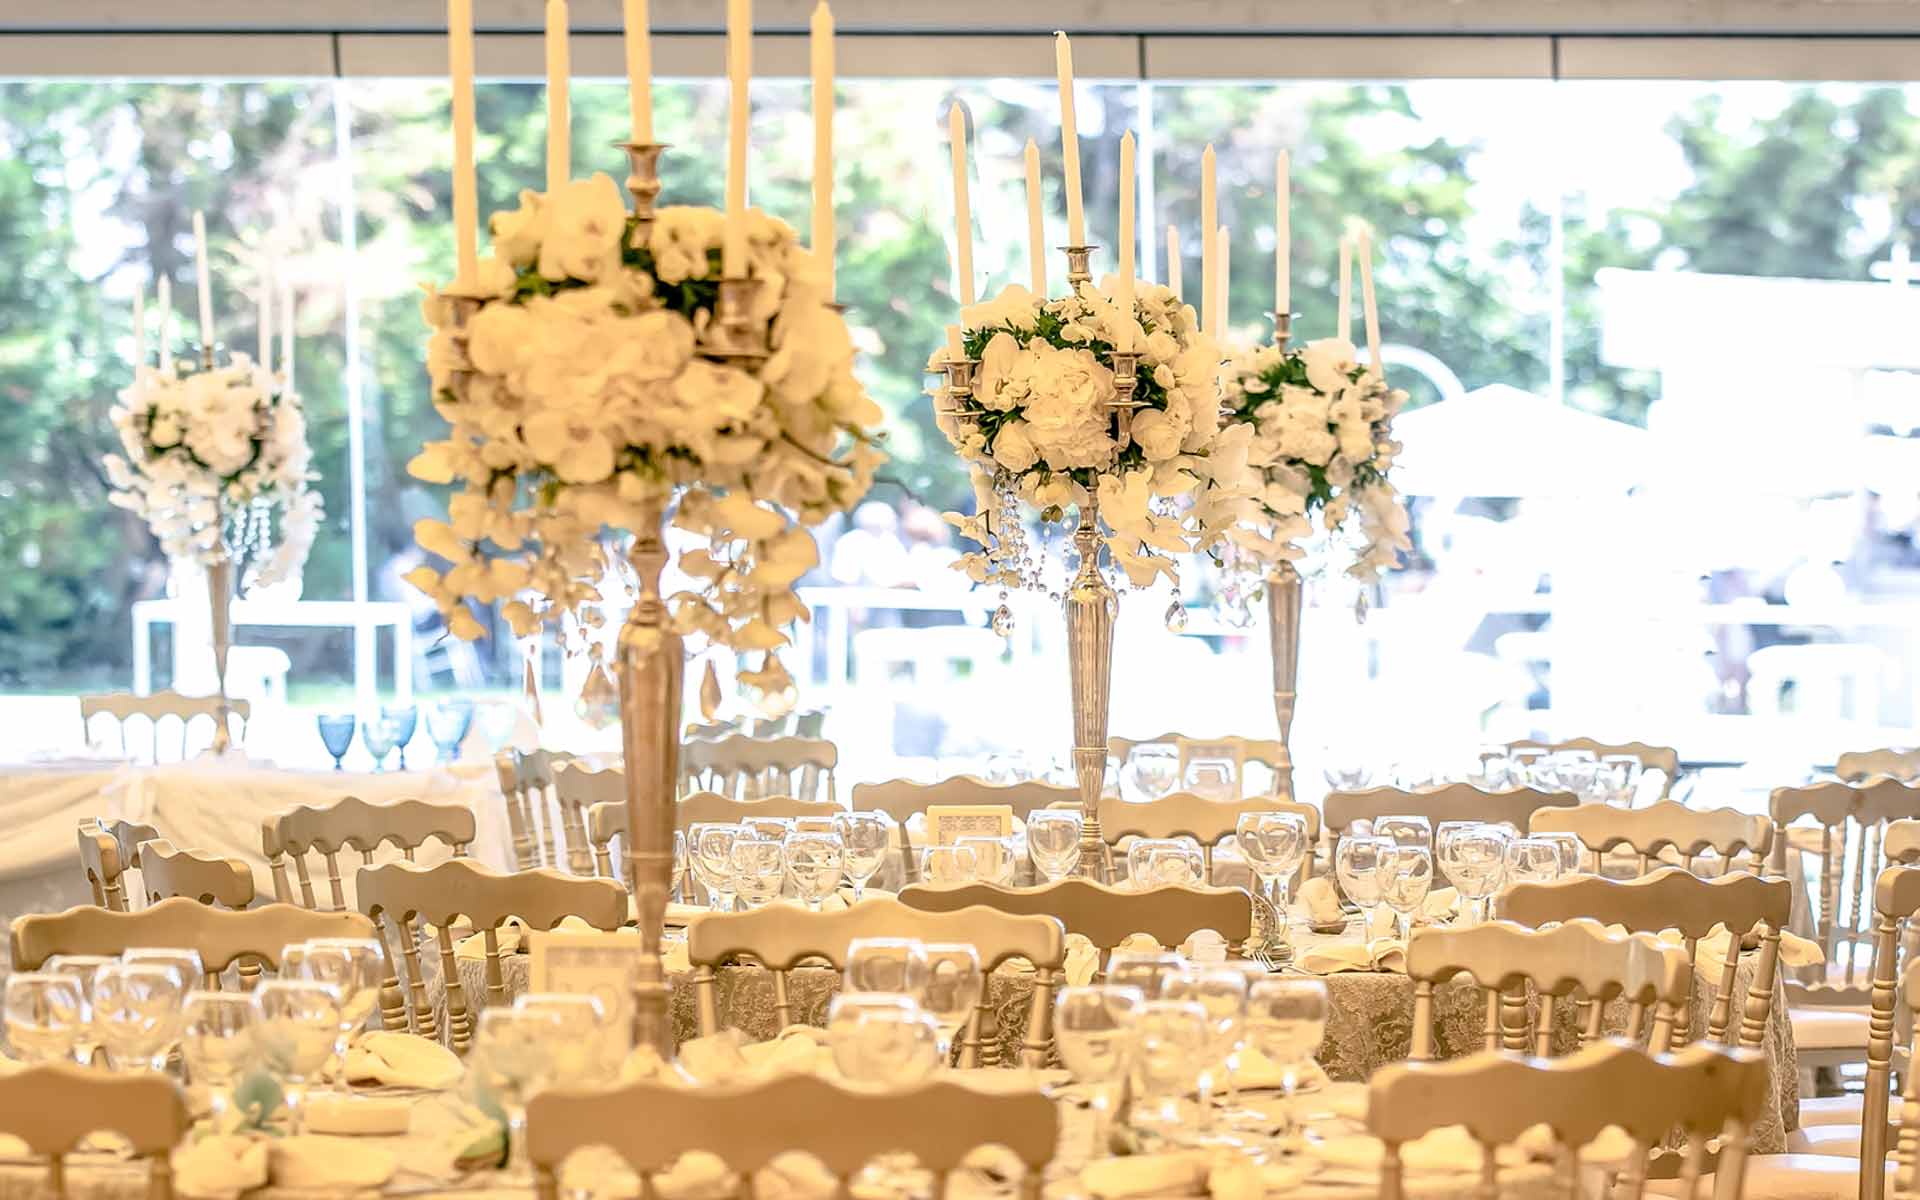 Extravagant Dream Wedding candelabras with crystals and white orchids